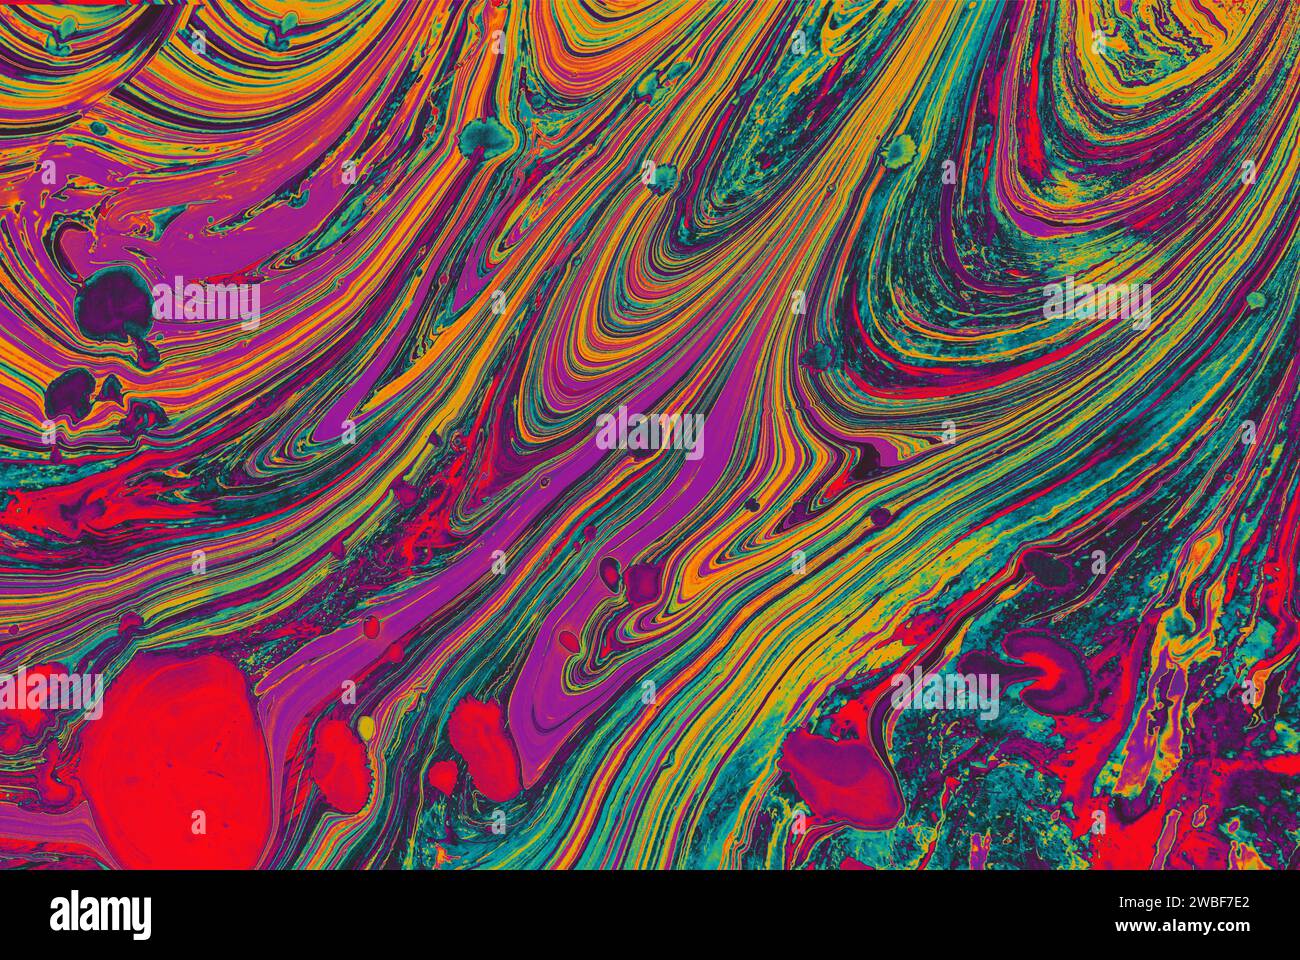 Abstract marbling art patterns as background Stock Photo